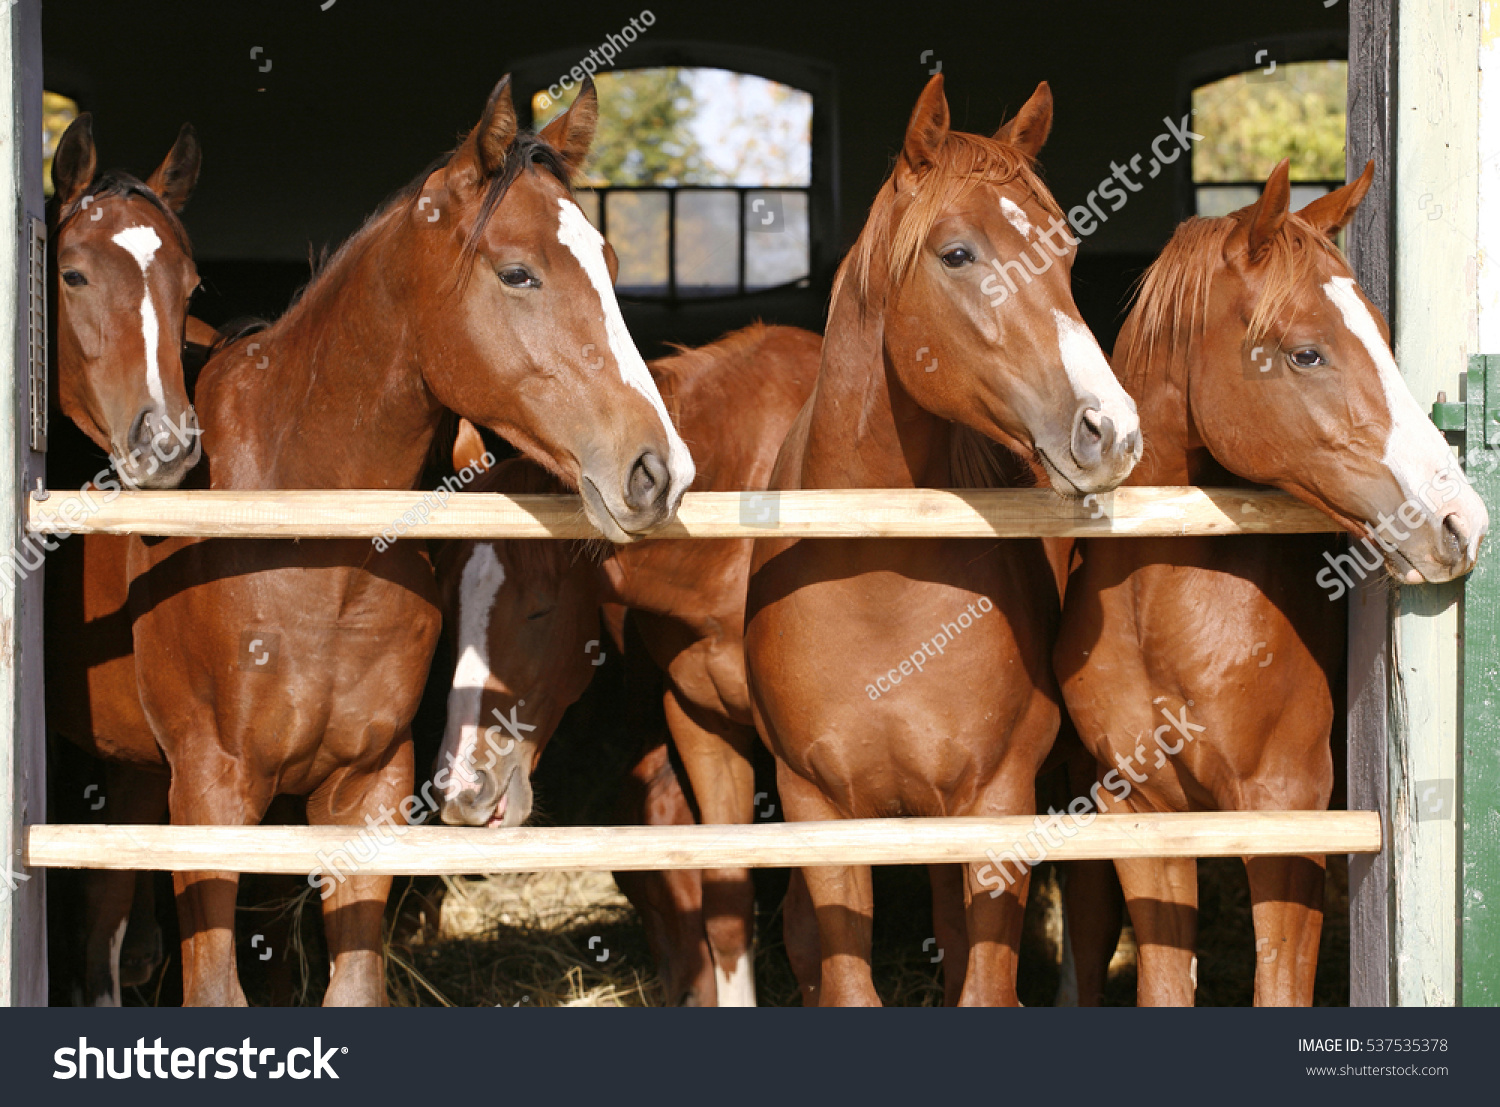 Purebred anglo-arabian chestnut horses standing at the barn door #537535378